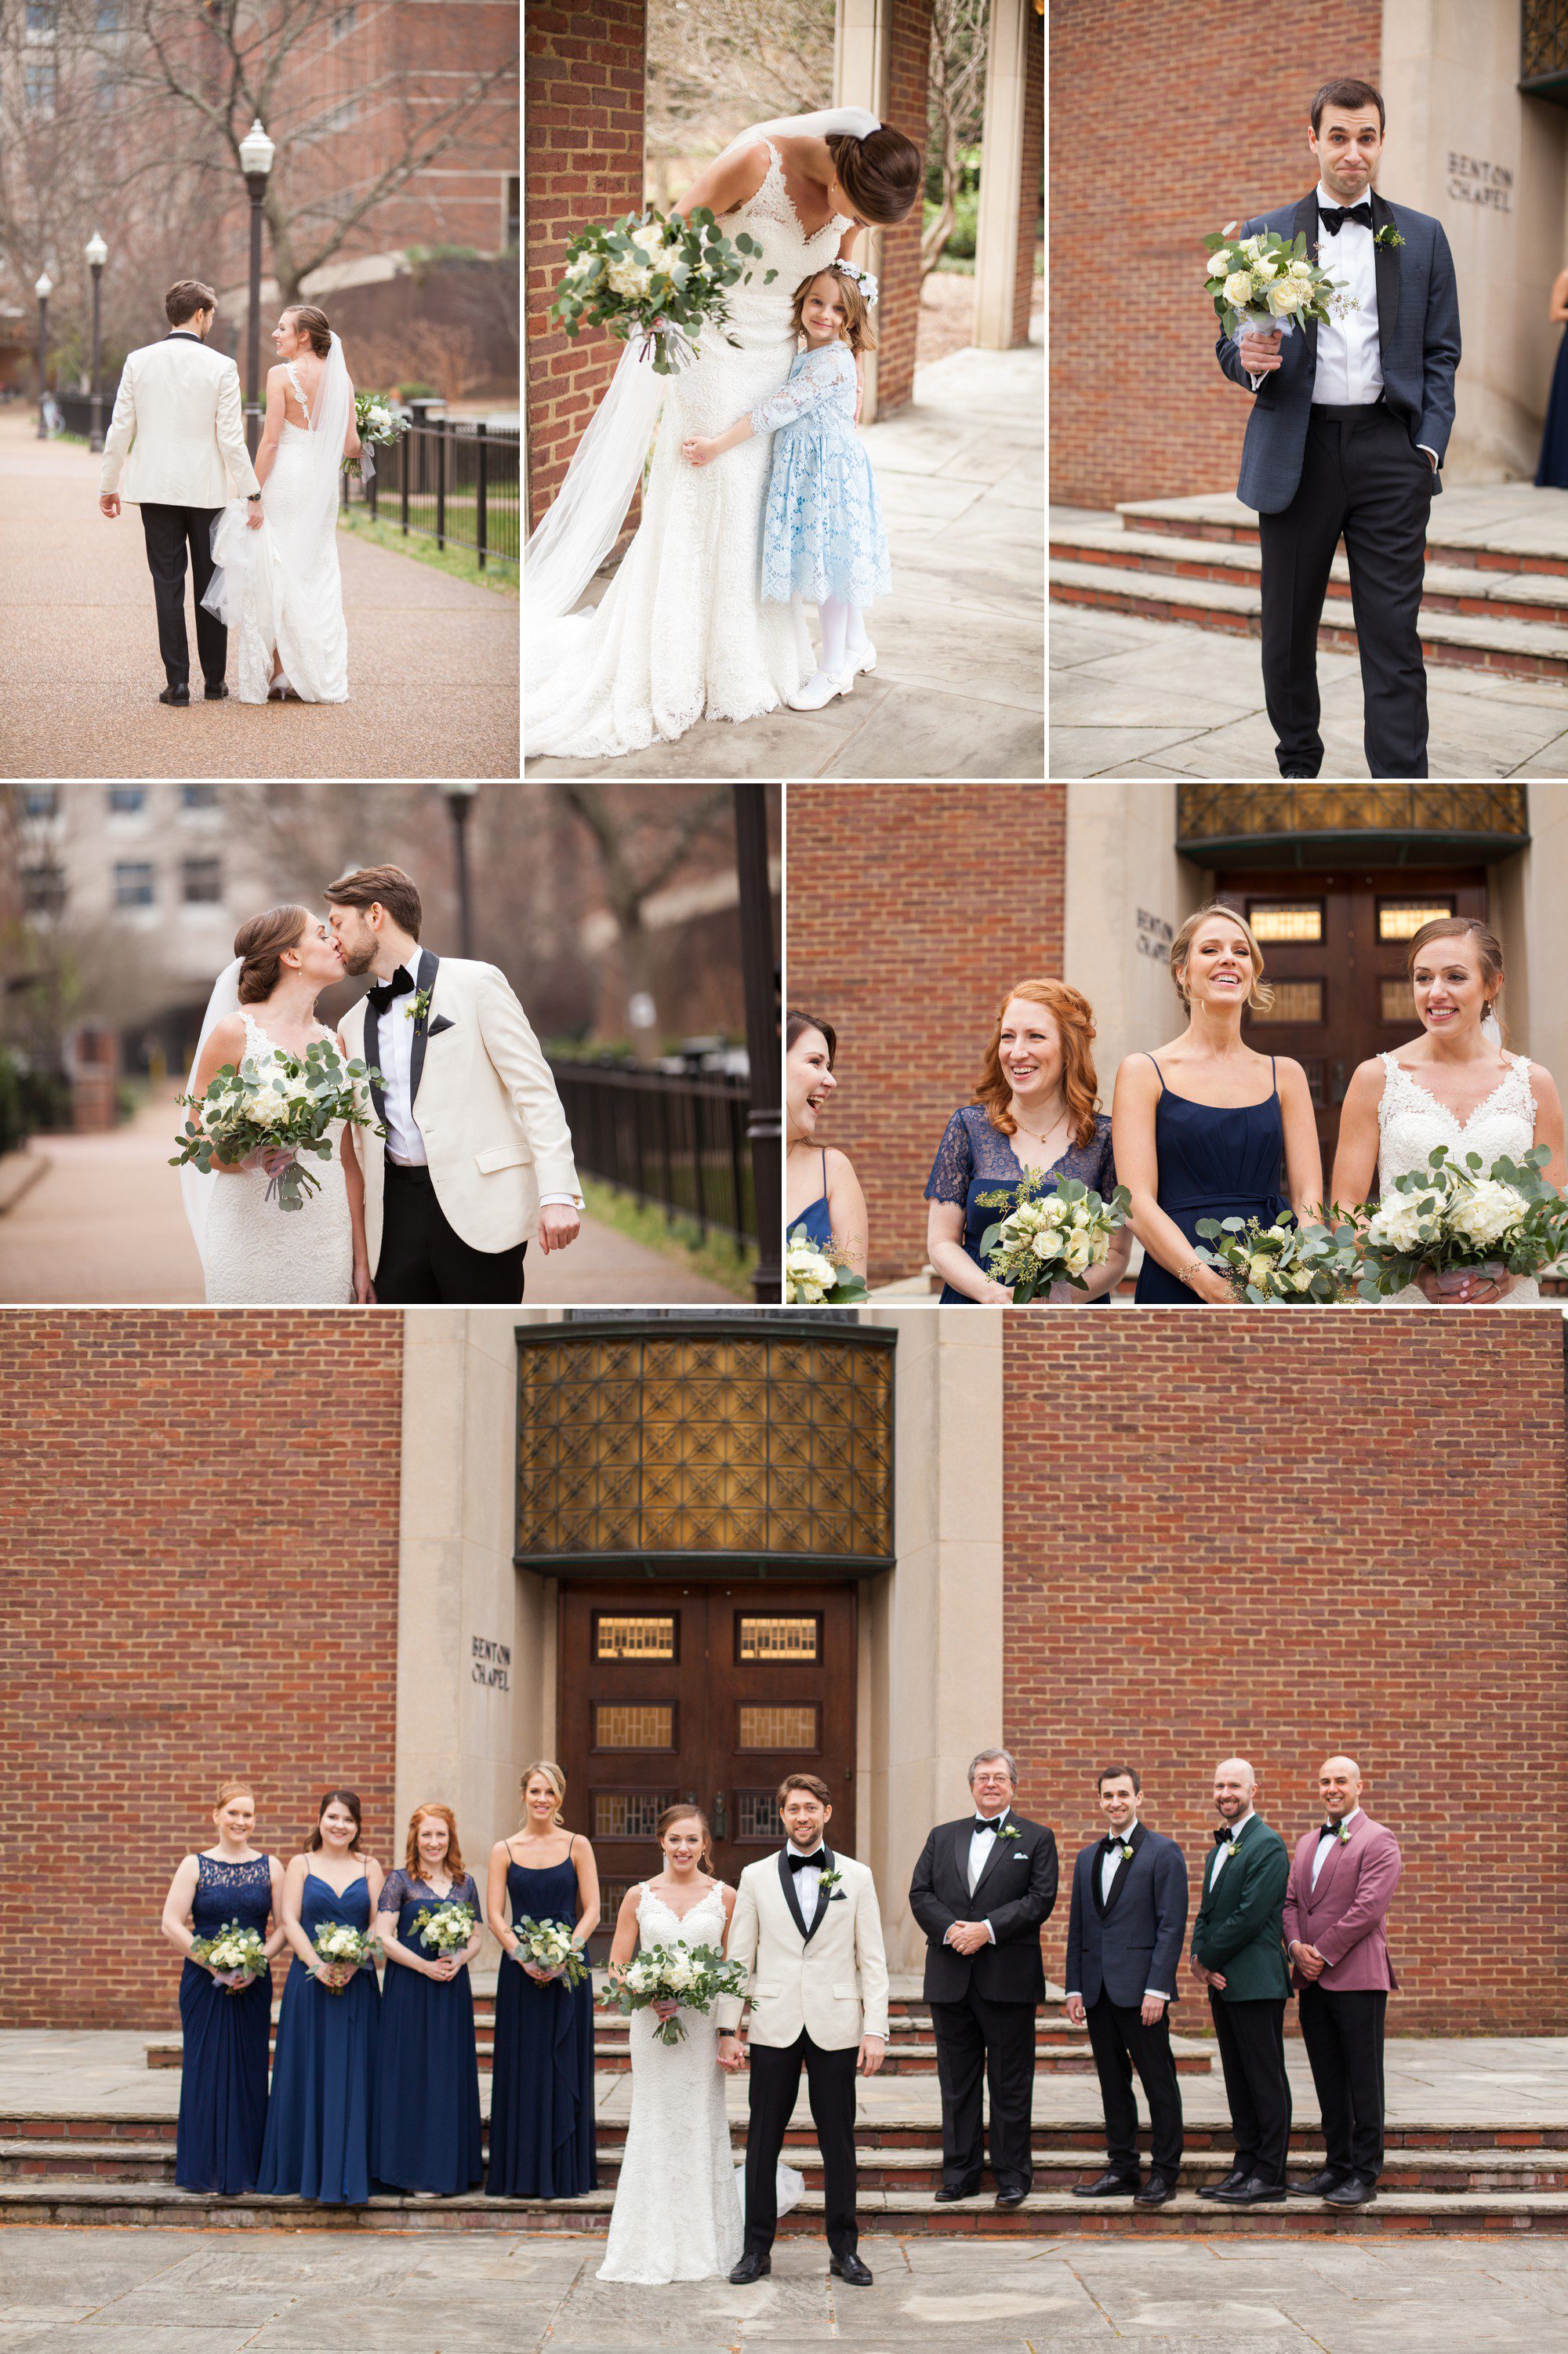 Bridal party photos with bride and groom before the wedding ceremony at Benton Chapel in Nashville TN. Wedding photography by Krista Lee.